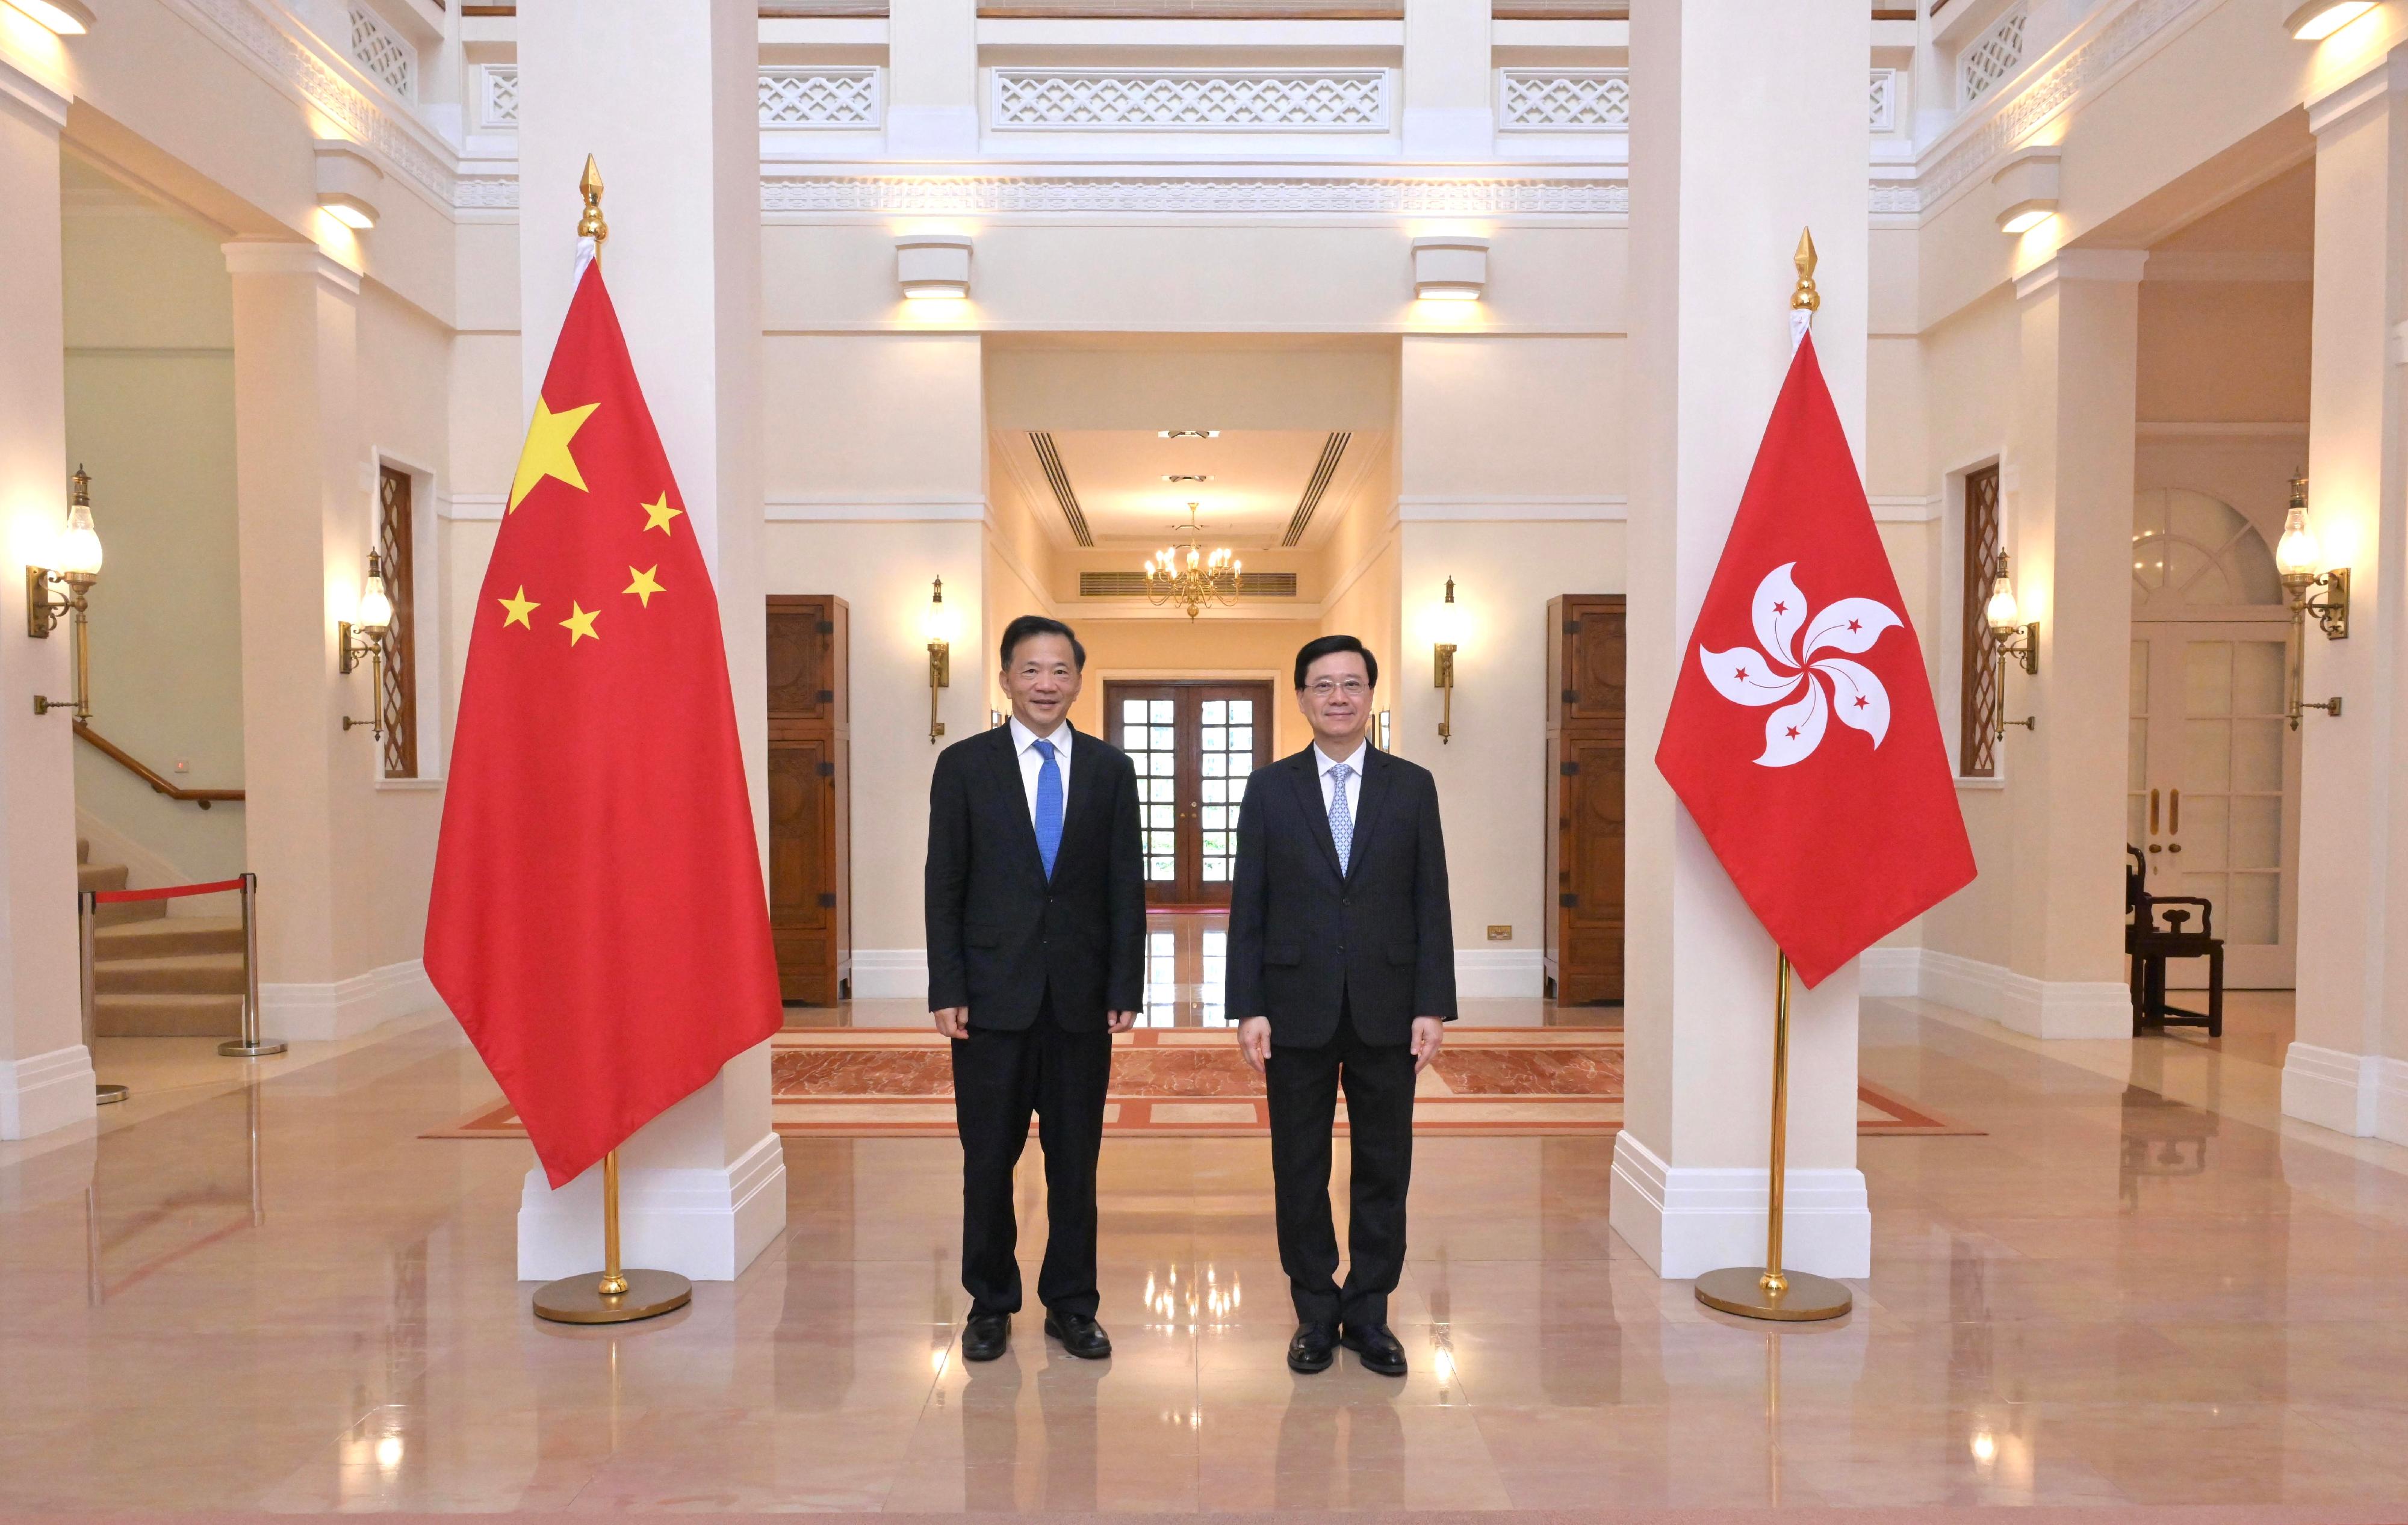 The Chief Executive, Mr John Lee, met the Vice Minister of the Publicity Department of the Communist Party of China Central Committee and President and Editor-in-Chief of China Media Group, Mr Shen Haixiong, at Government House today (June 29). Photo shows Mr Lee (right) and Mr Shen (left).